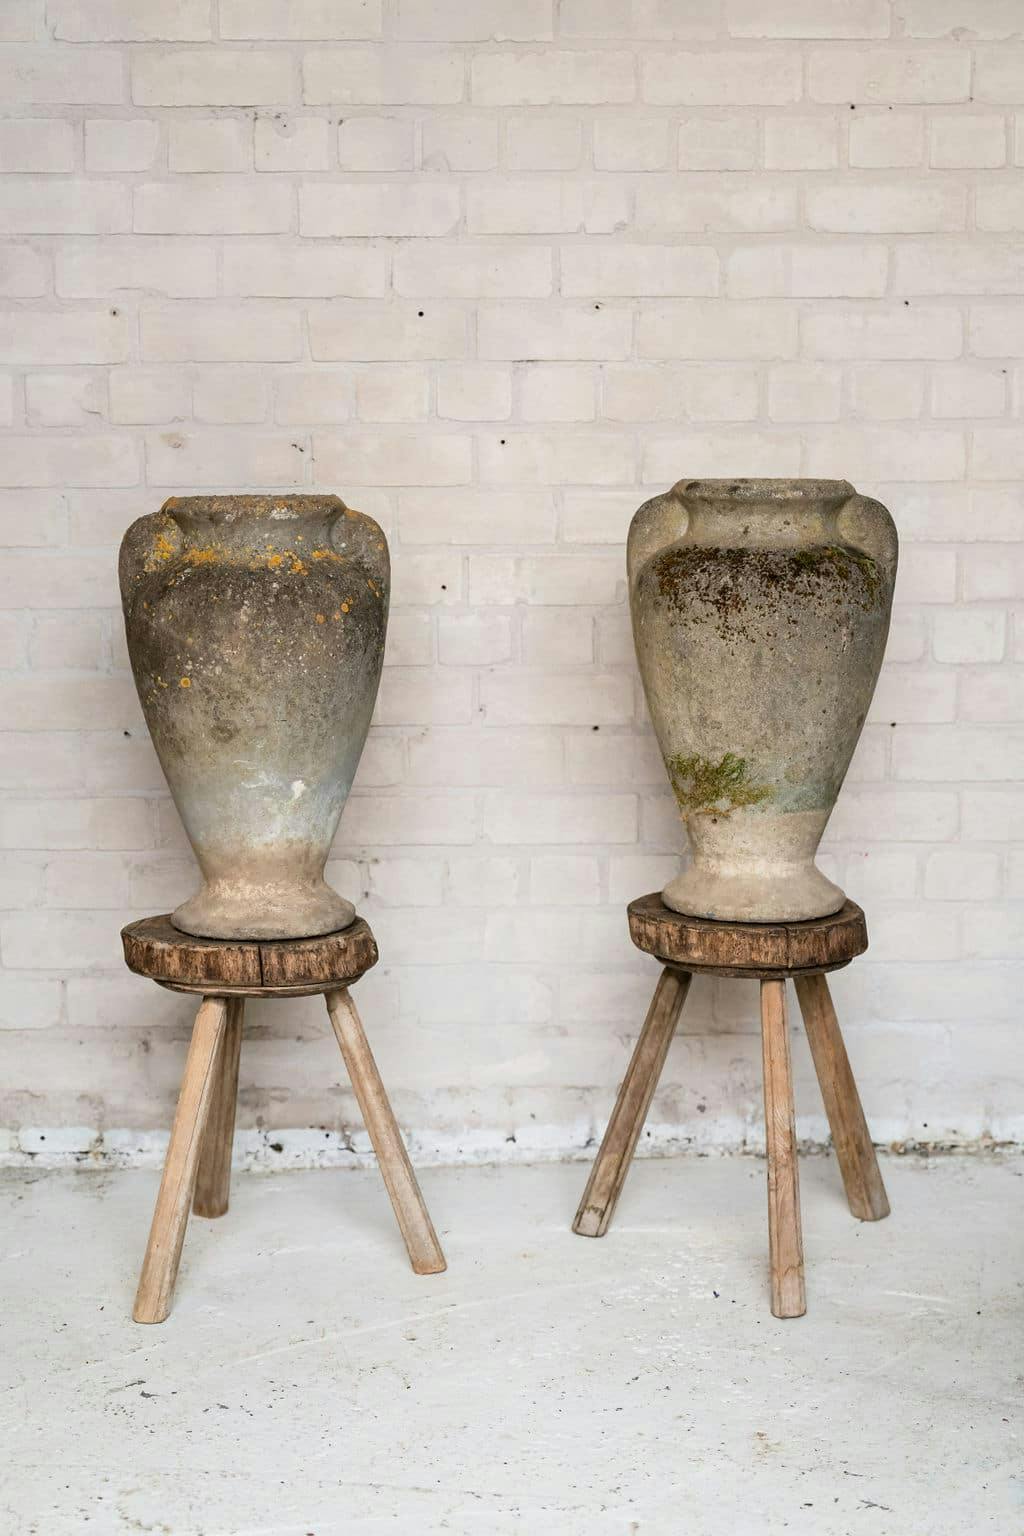 A Pair of Elegant French Tall Urns